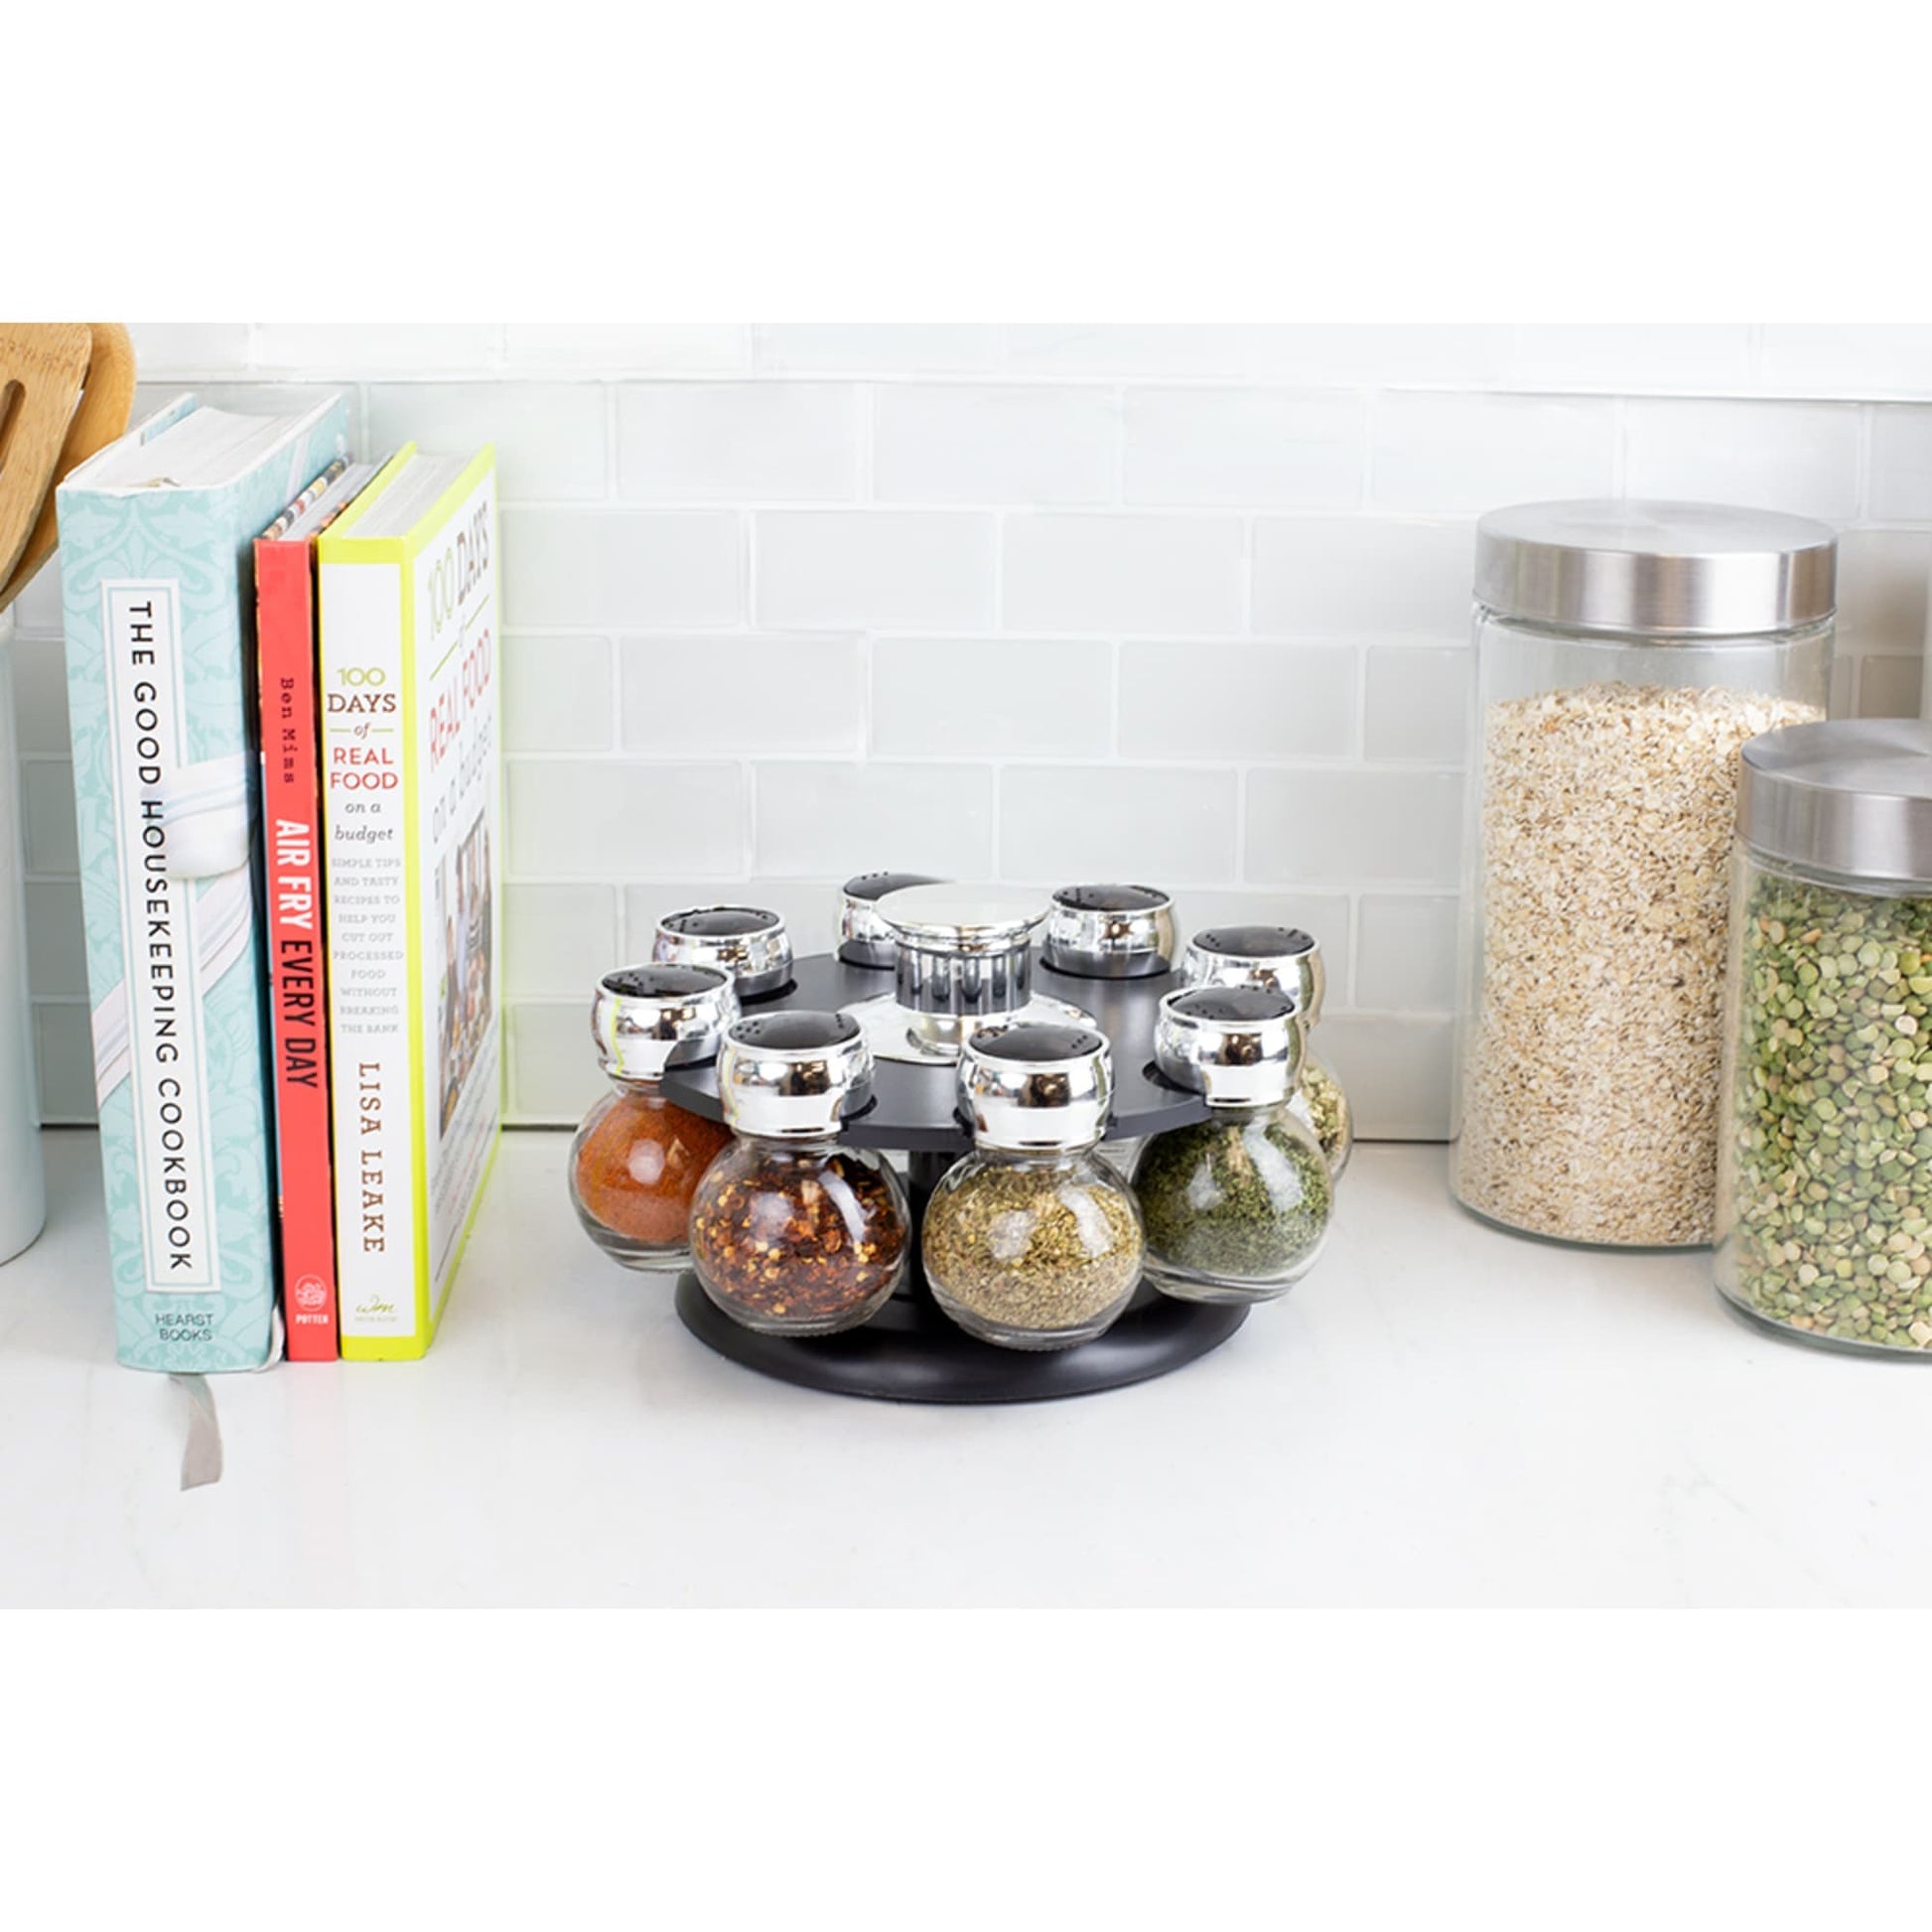 6-Jar Revolving Spice Rack, Spices and Seasonings Sets with Rack,  Countertop Seasoning Organizer Spice Pots Storage Container